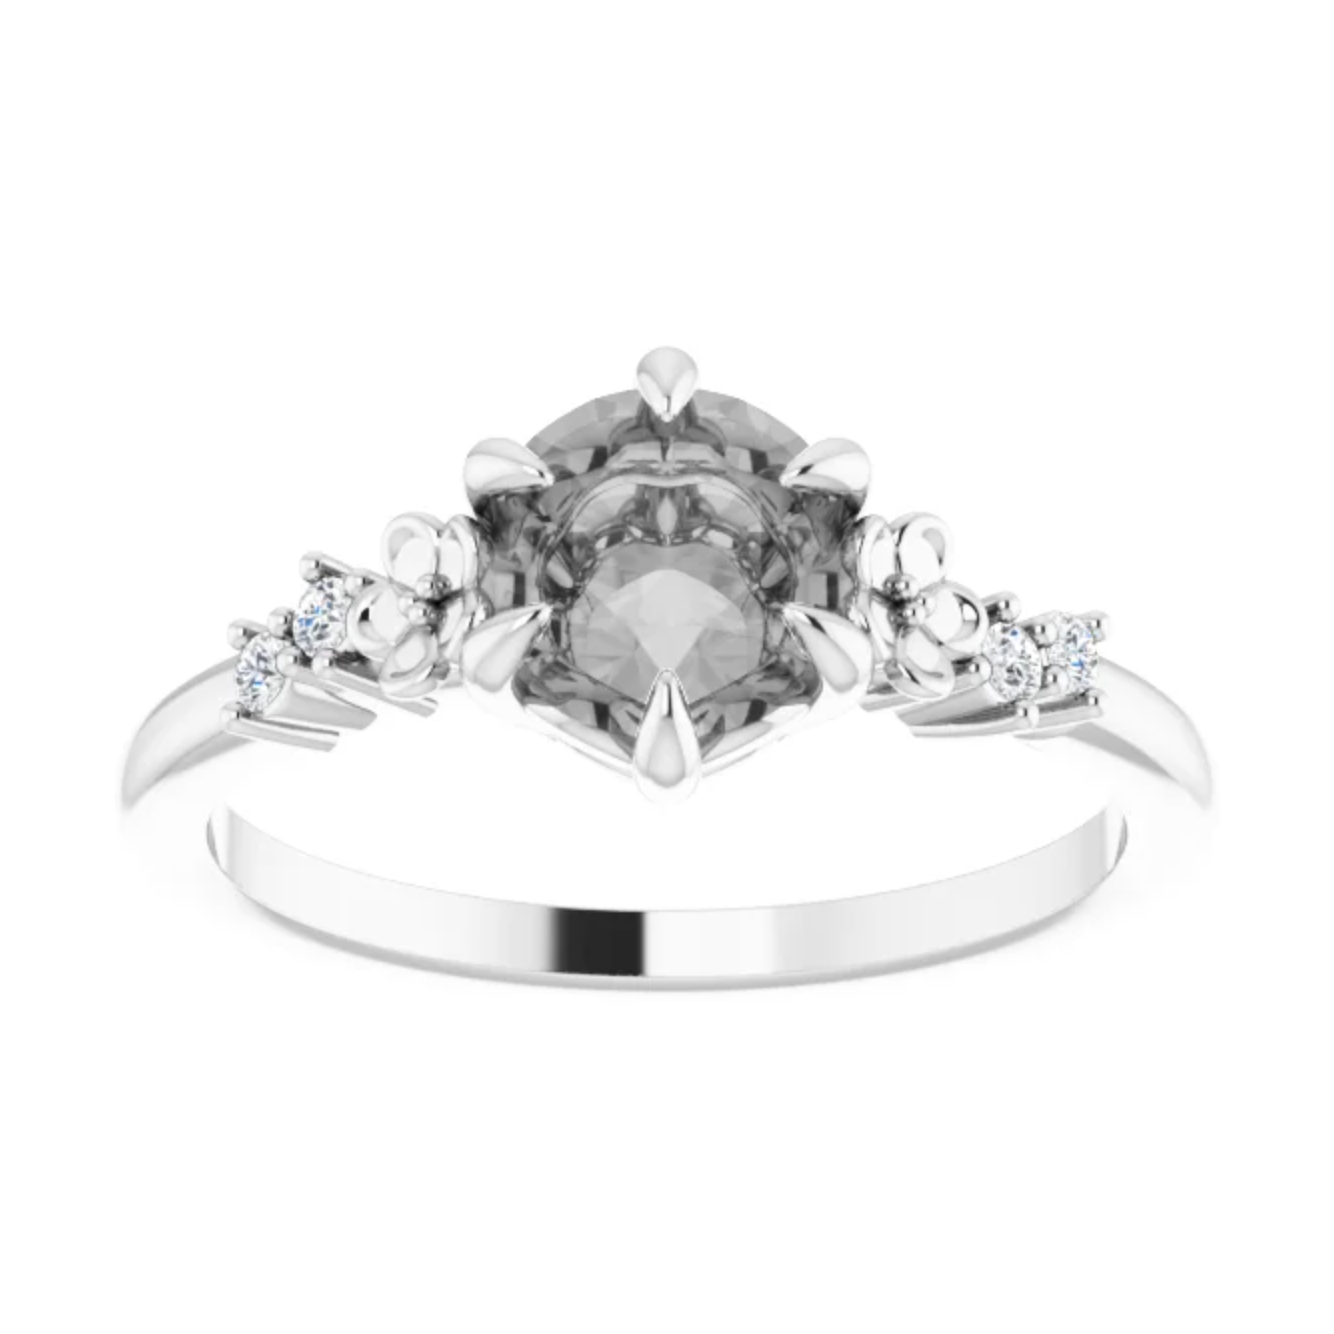 Meadow Setting - Midwinter Co. Alternative Bridal Rings and Modern Fine Jewelry